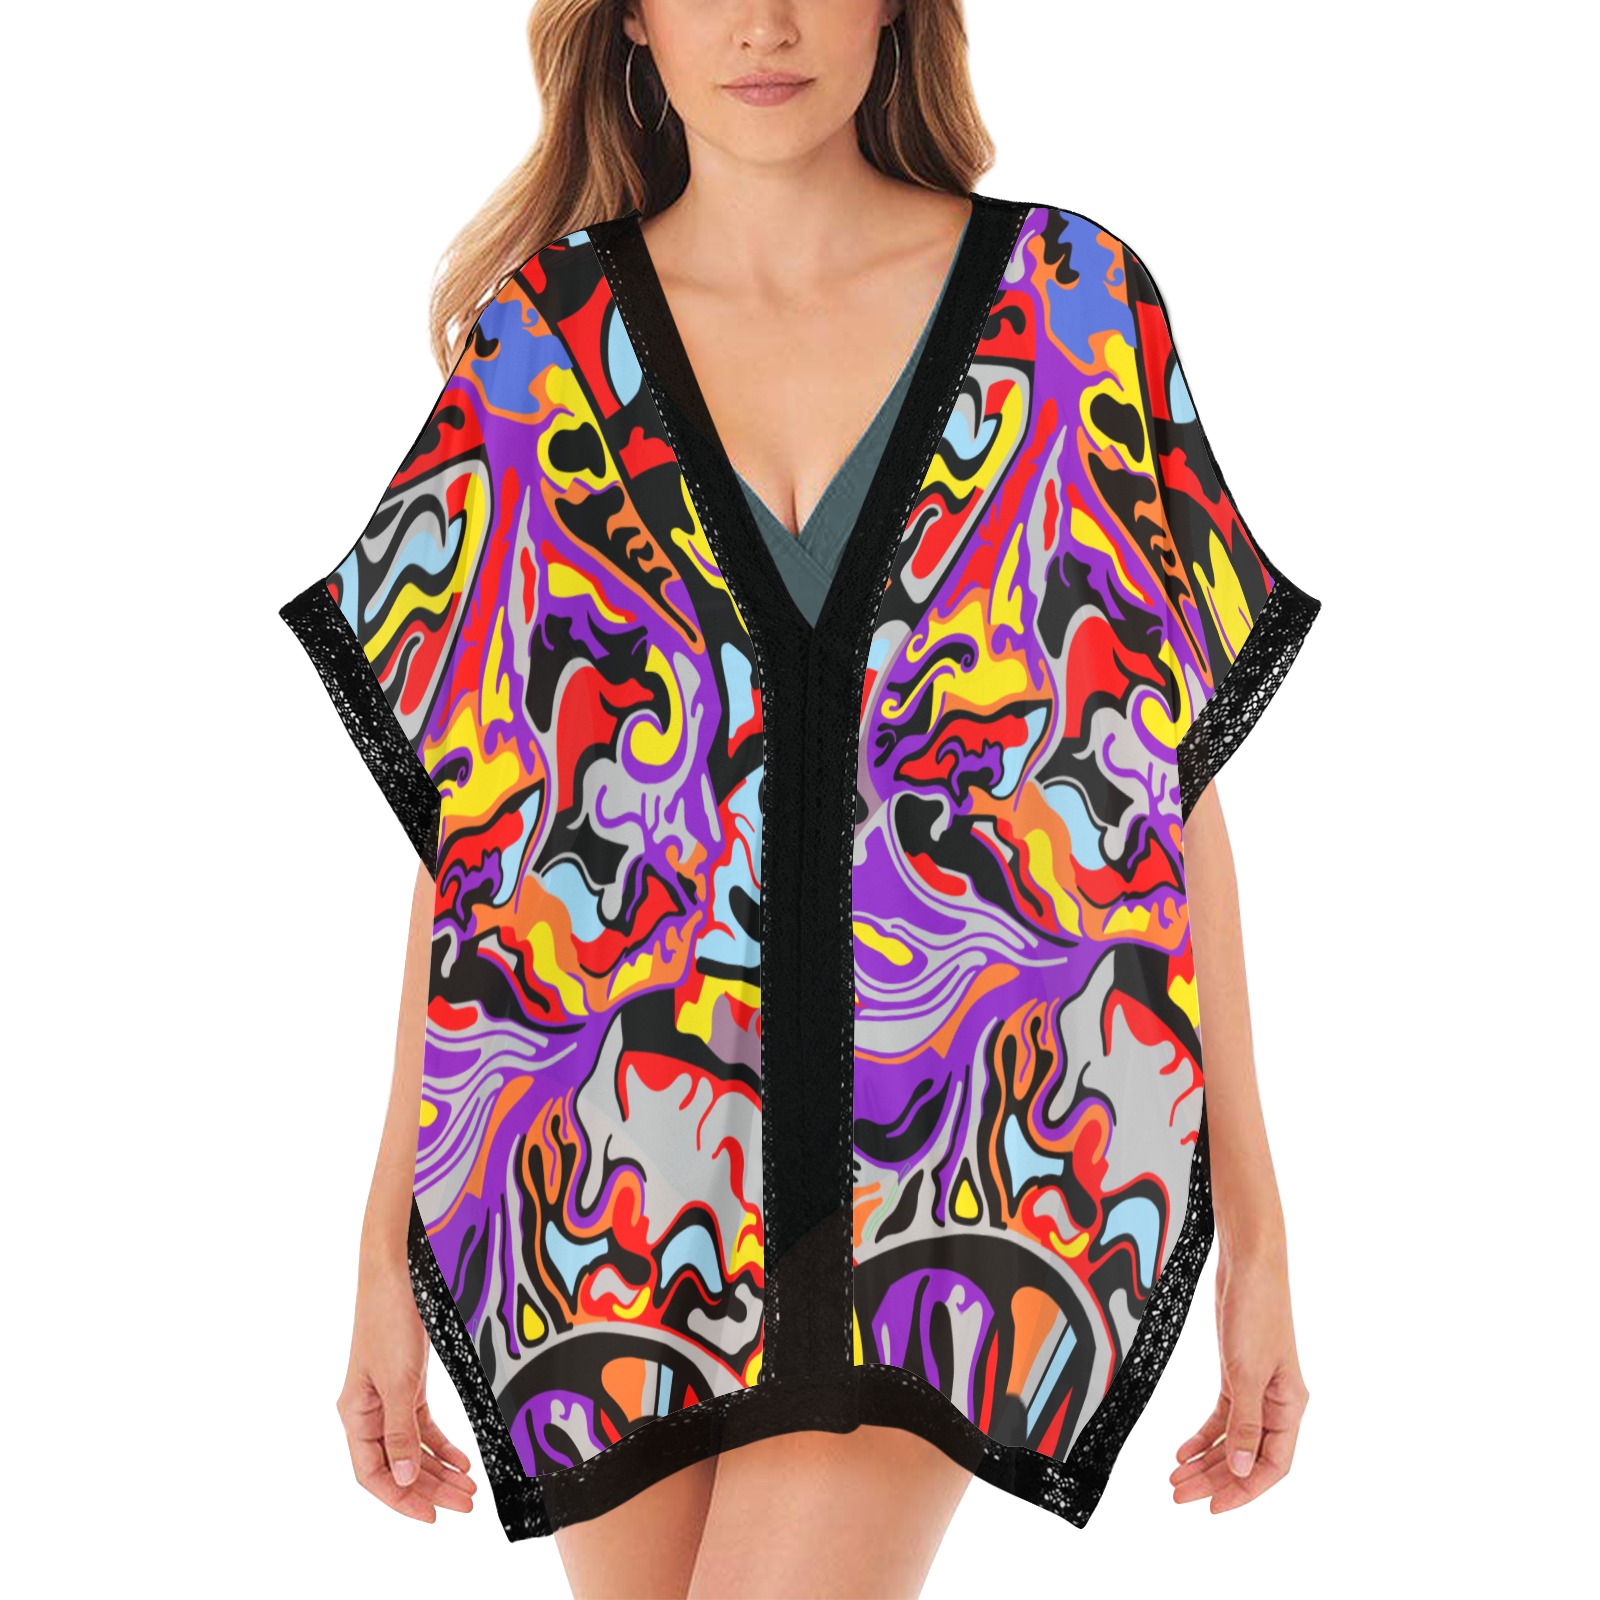 Life Cover Up Women's Beach Cover Ups